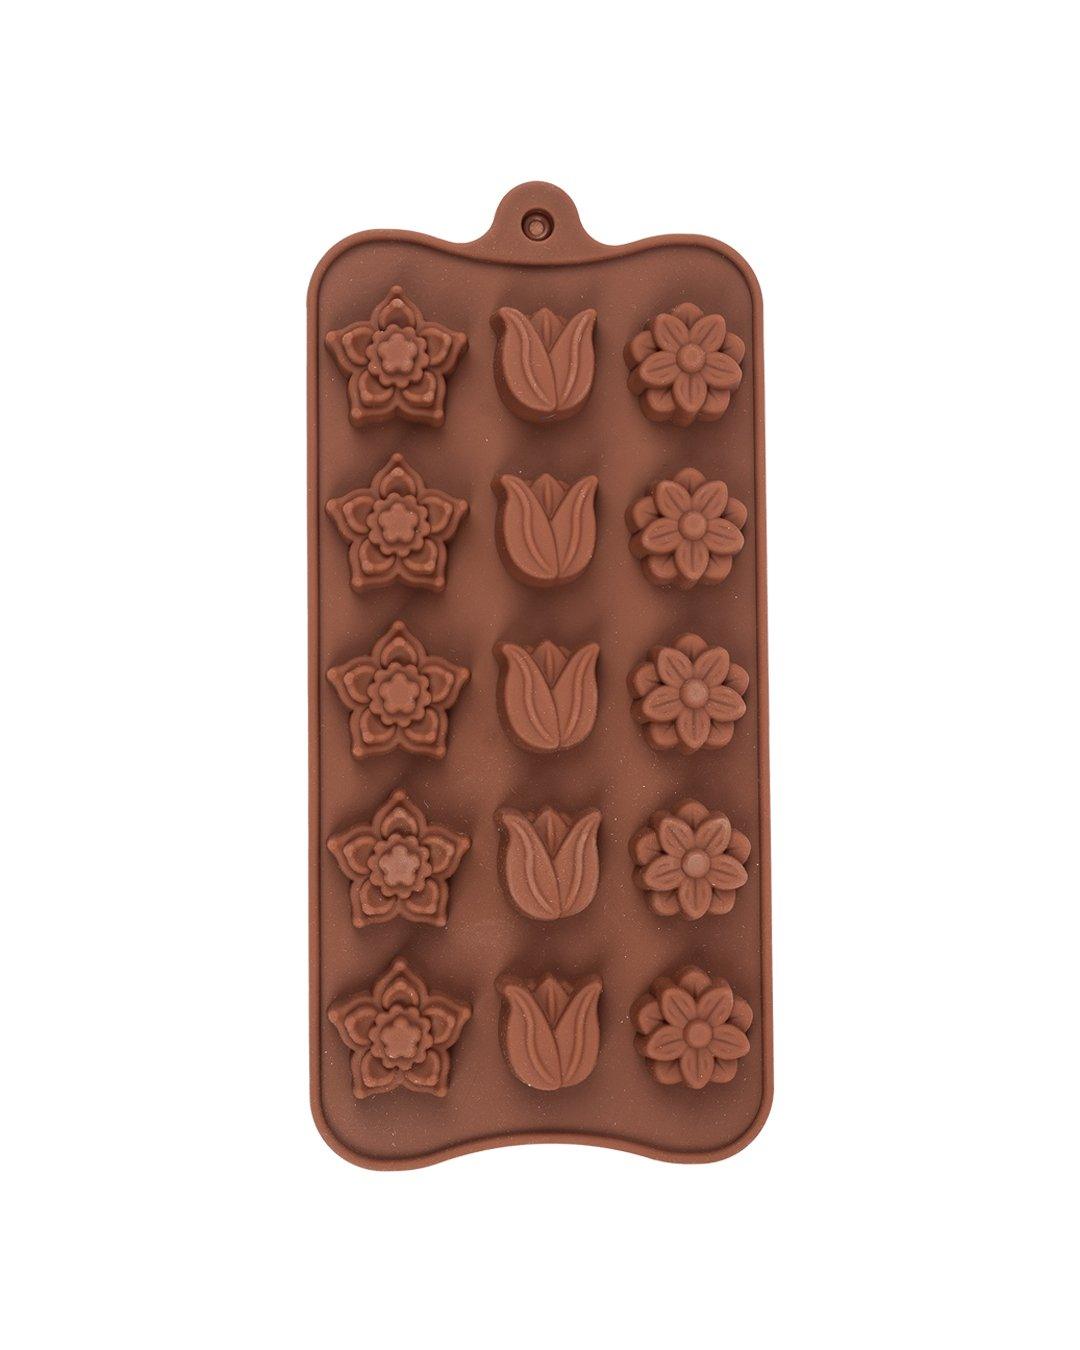 Oytra chocolate mould 3 different shapes in 1